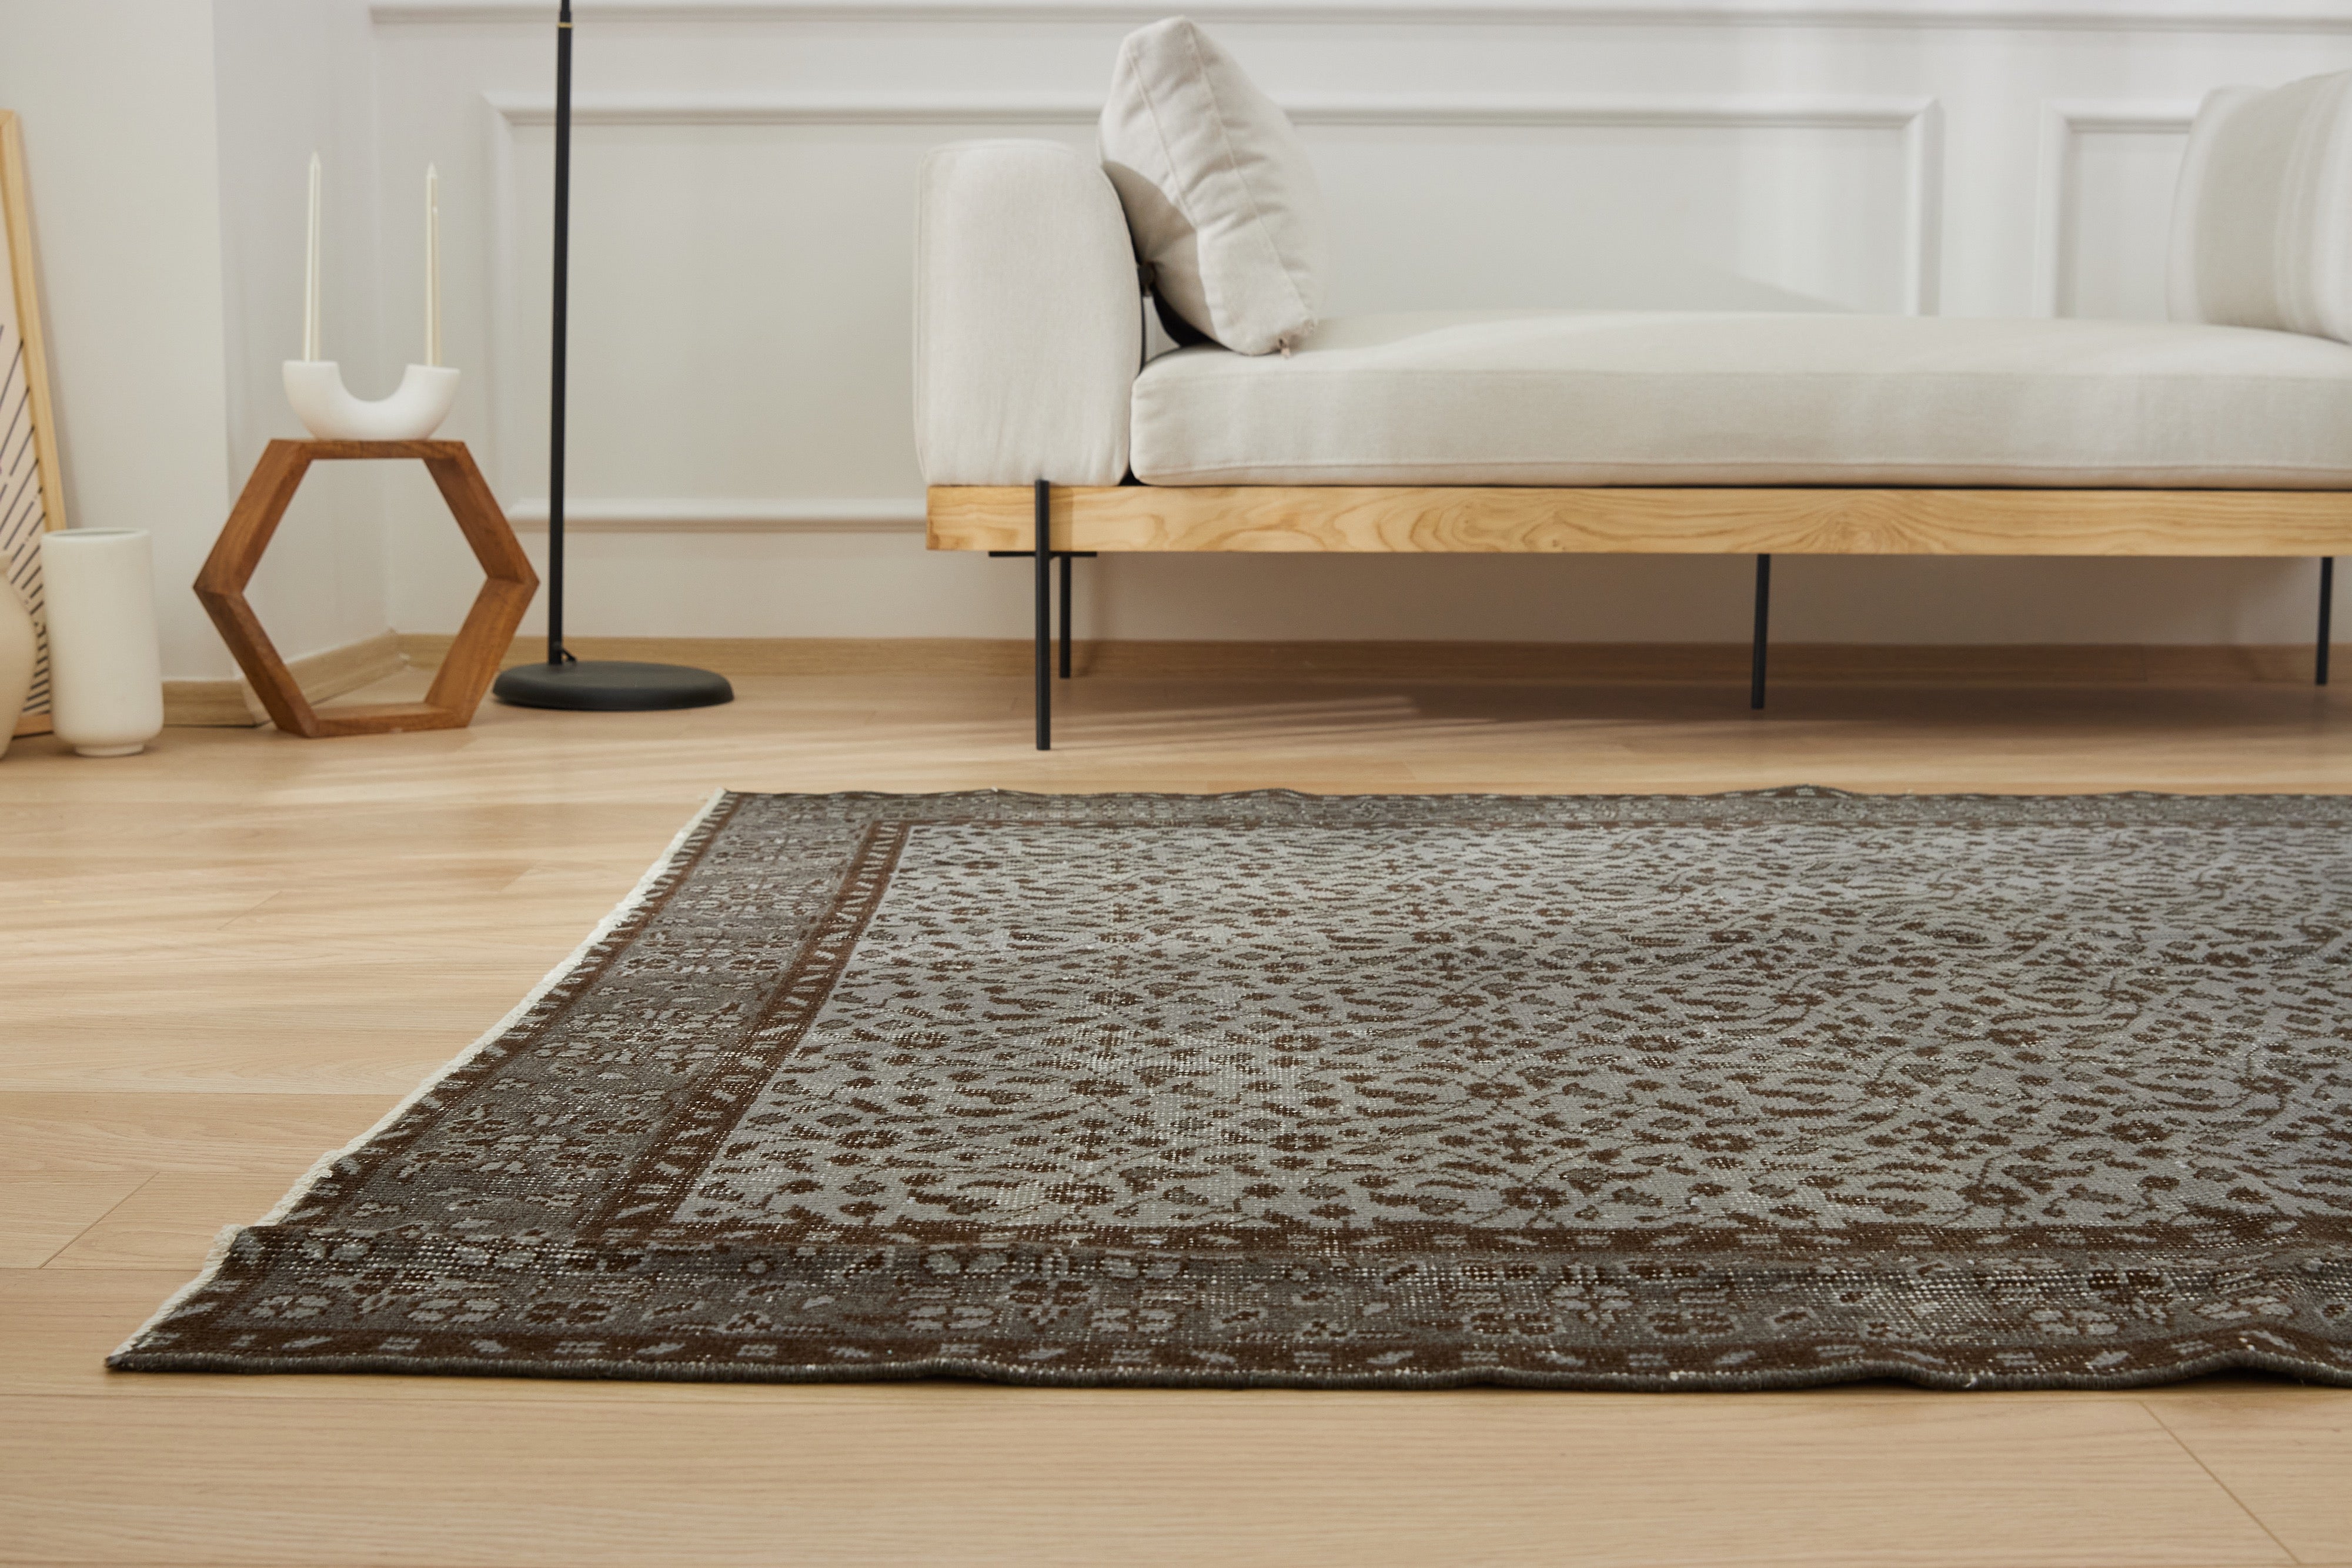 Vienna - Fusion of Timeless Design and Modern Rug Style | Kuden Rugs